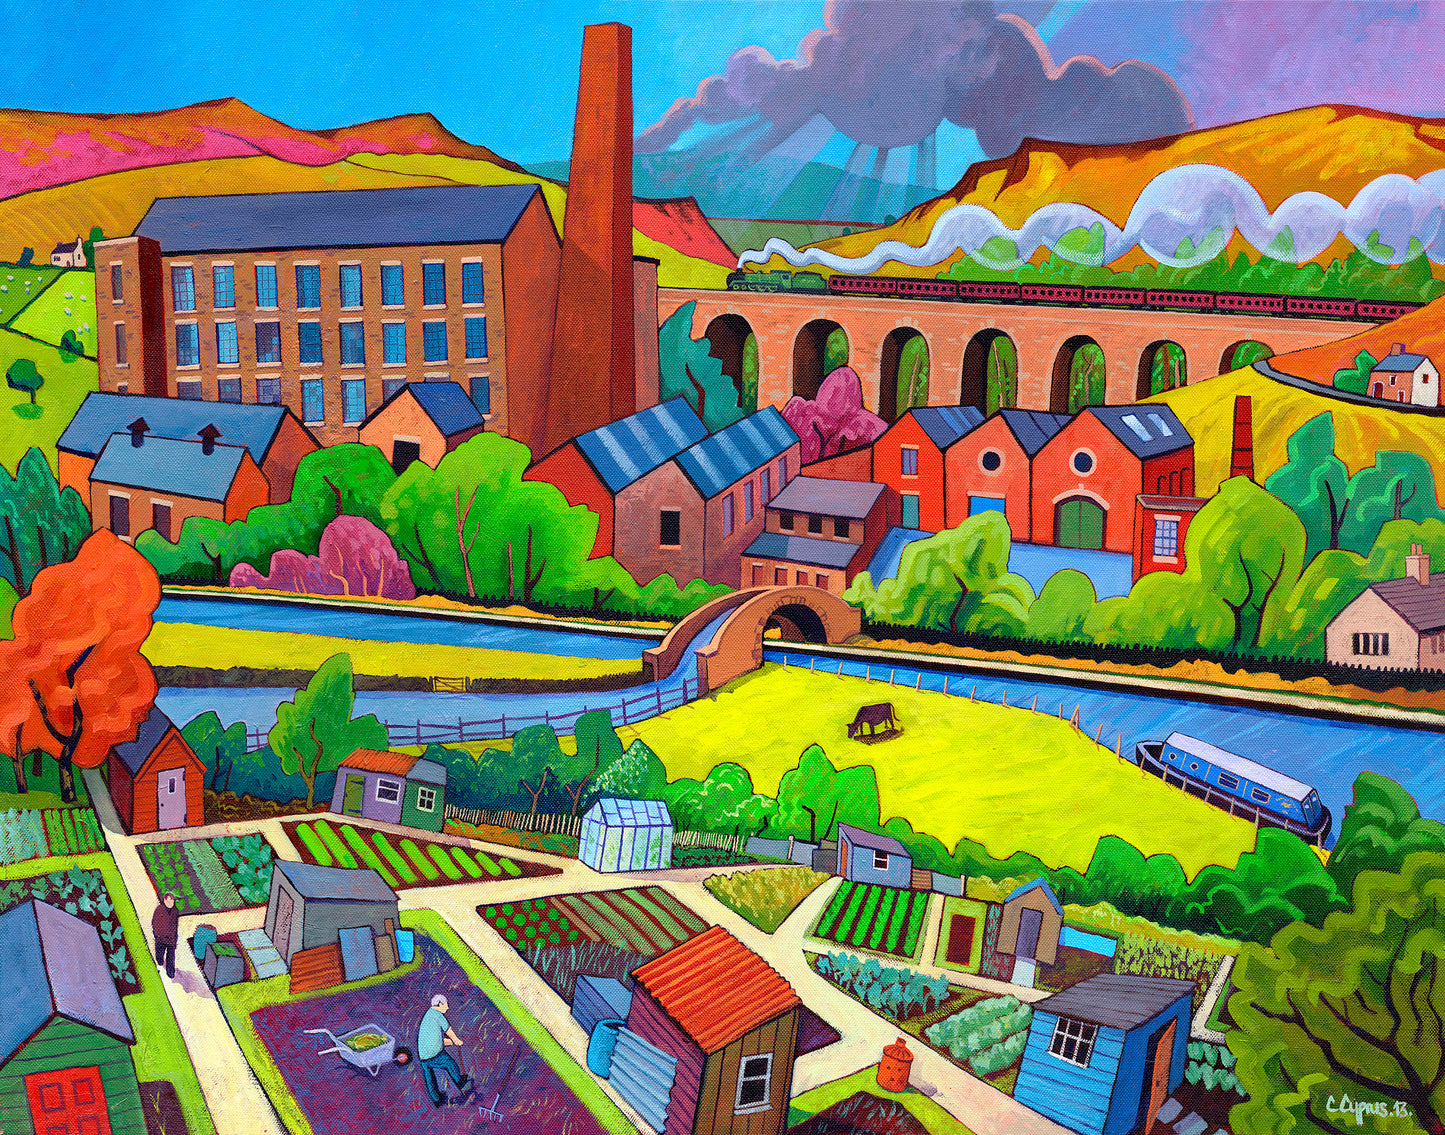 'Pennine Valley' Oil painting by British artist Chri Cyprus. Features a colourful scene in a valley, of allotments, industry, pennine hills , with a wonderful canal boat making its way through the scene. © Chris Cyprus 2013 archive